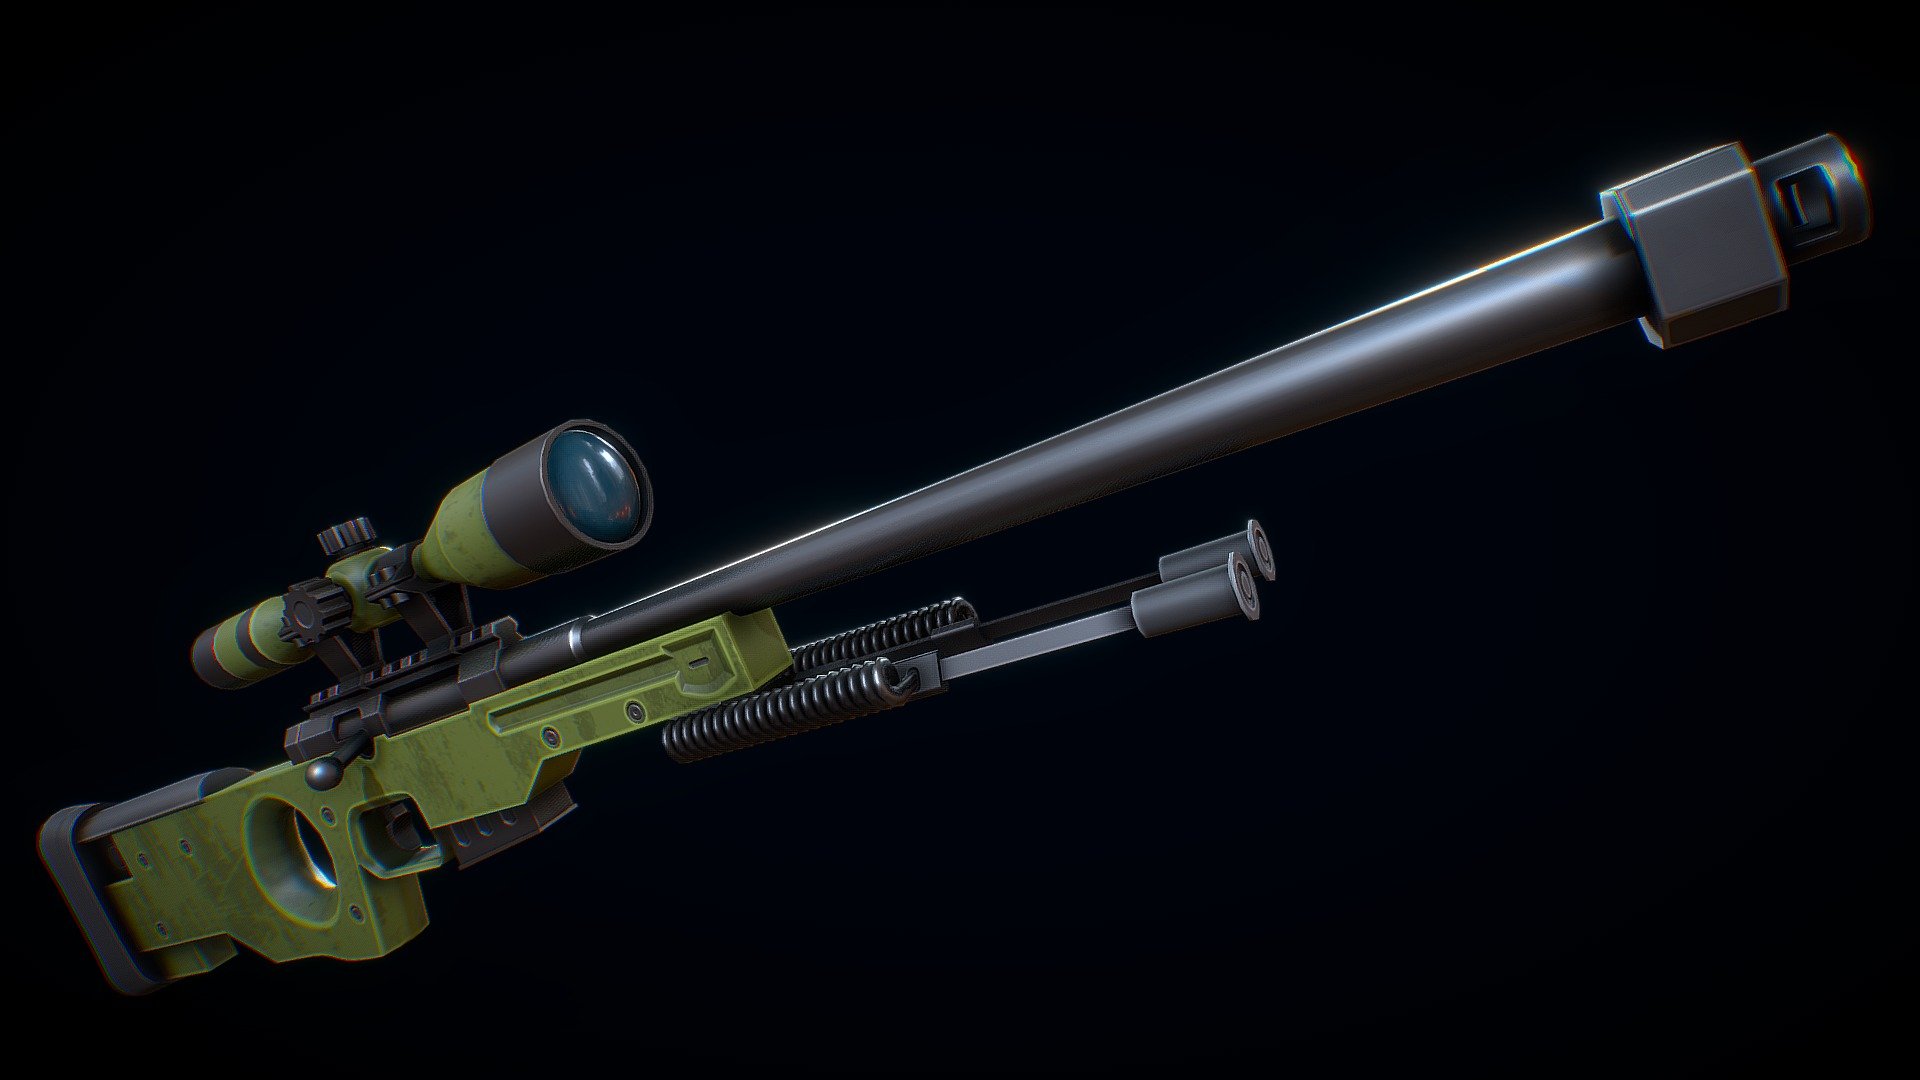 Low-poly 3D model of Stylized AWP Sniper Rifle. This model has 2K textures, doesn't contain any ngons, has optimal topology 3d model